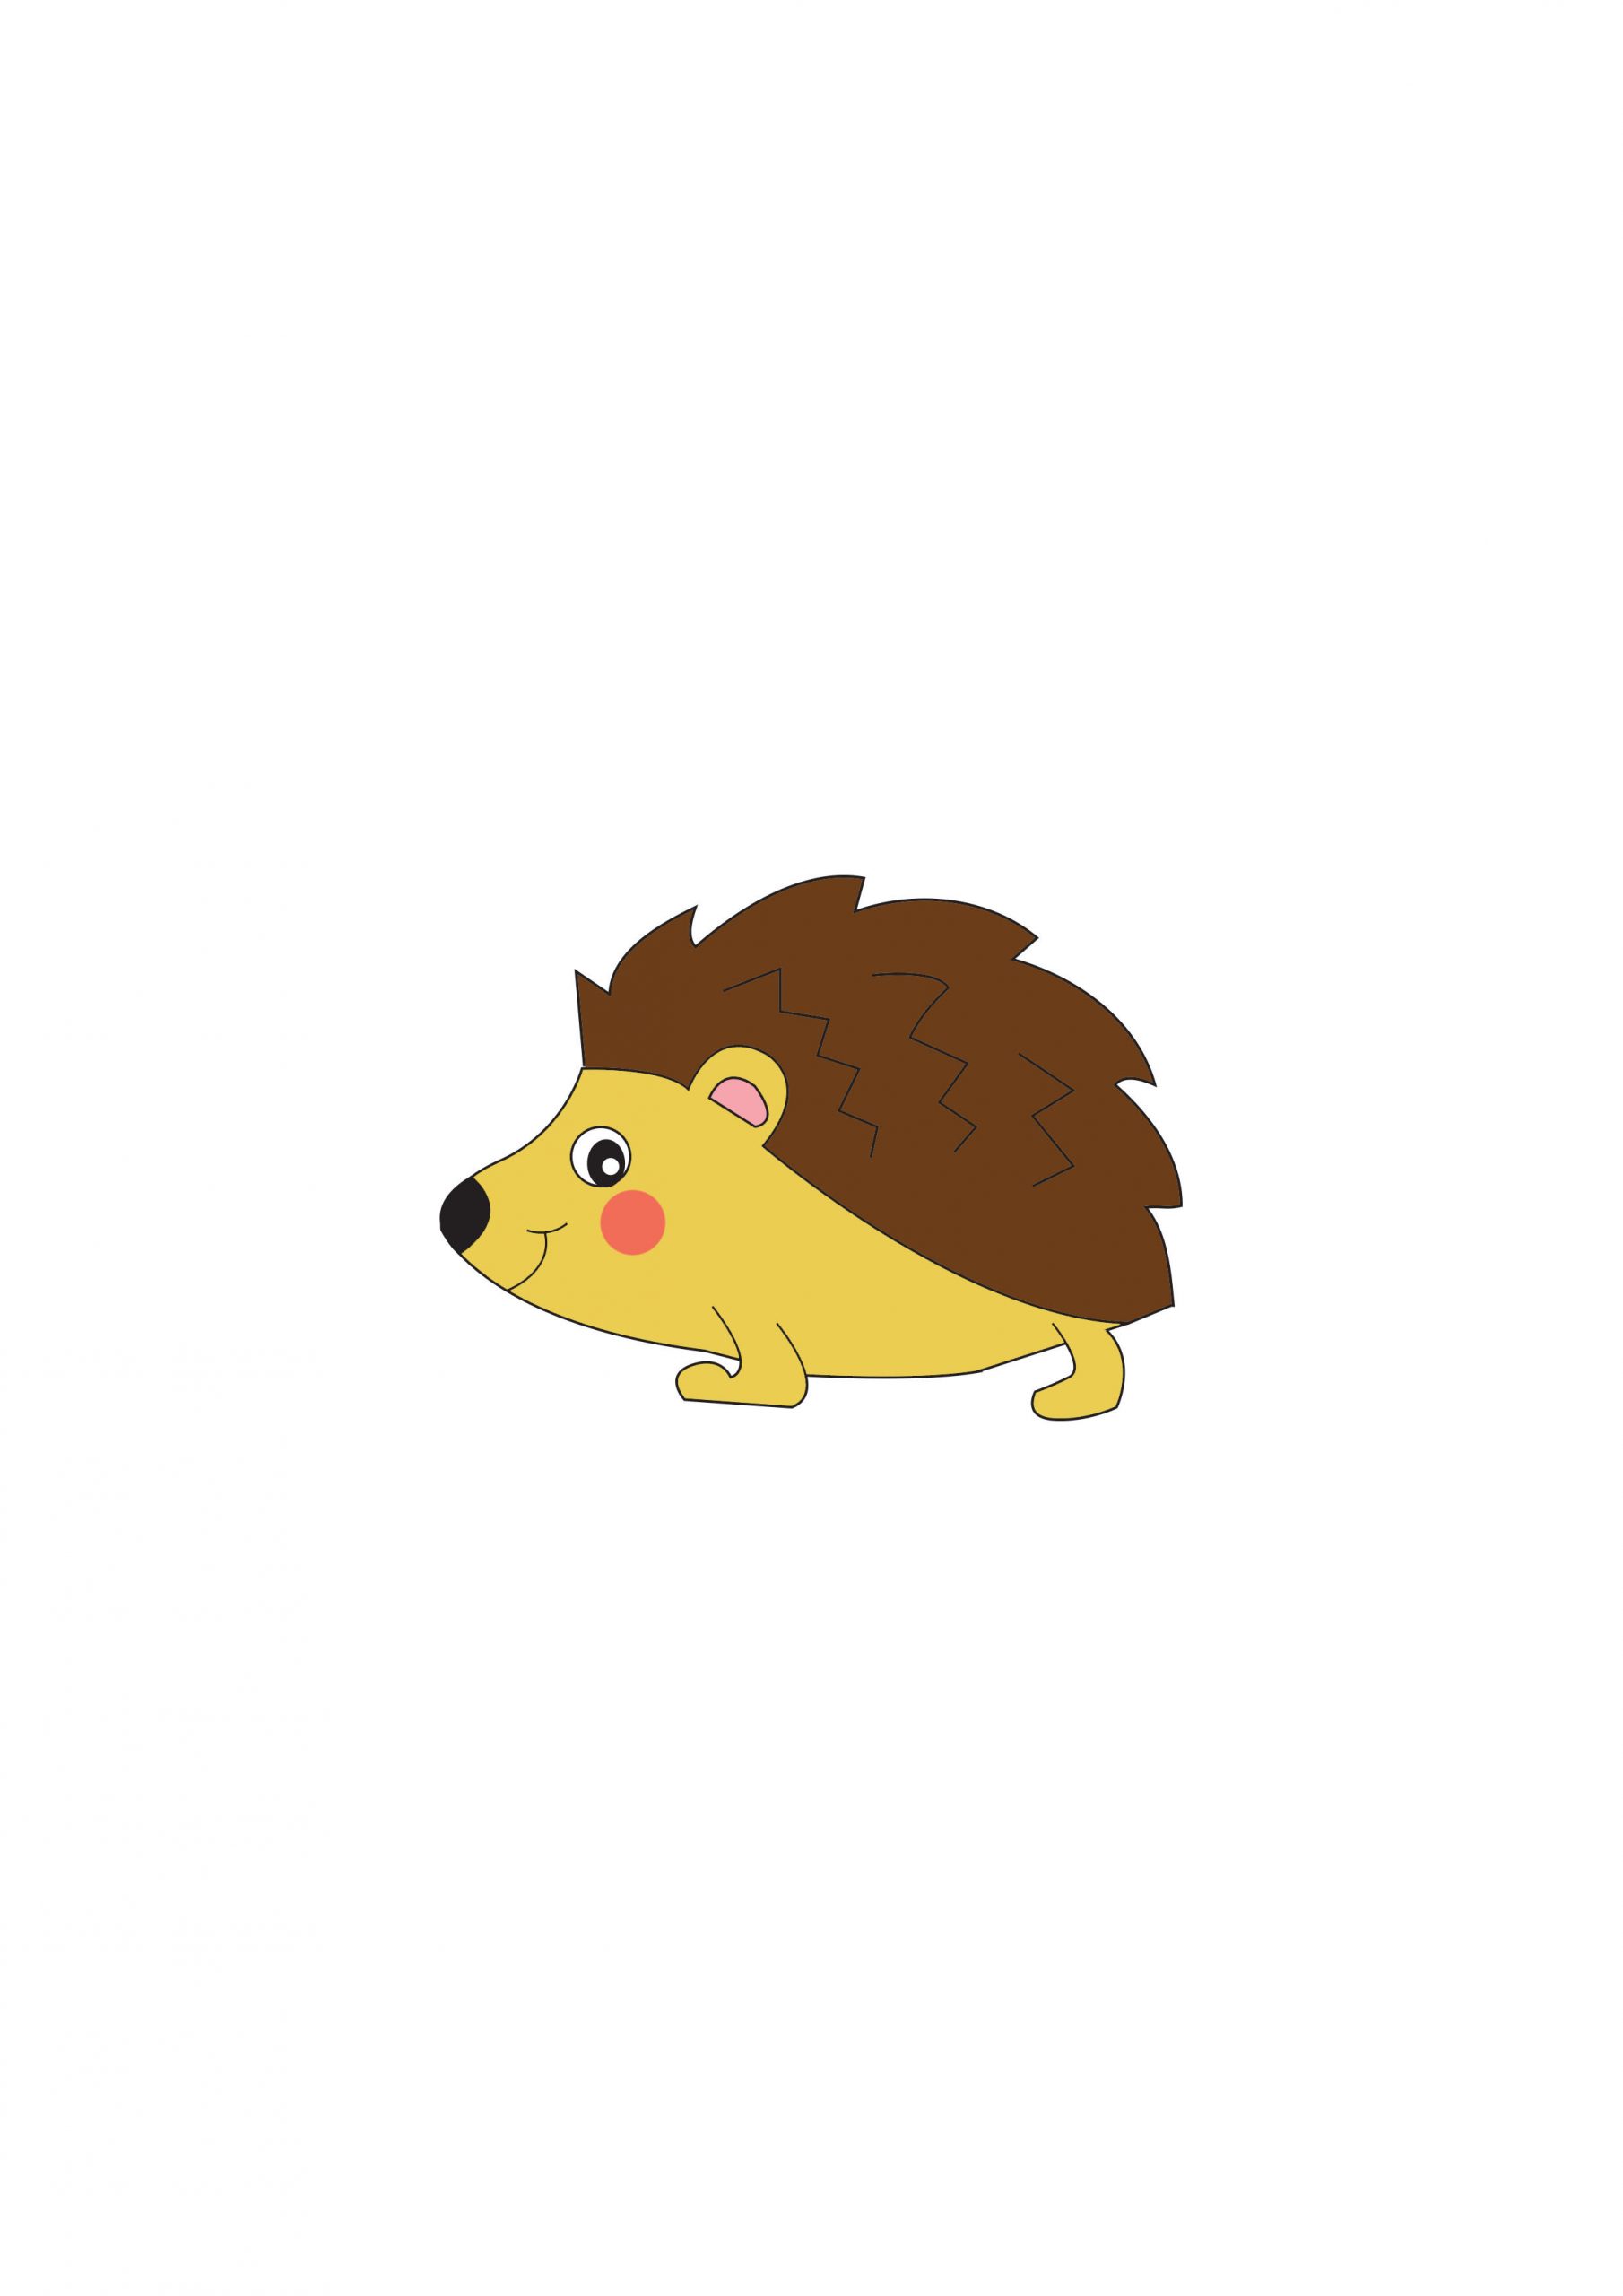 How to Draw an Easy Hedgehog Step by Step